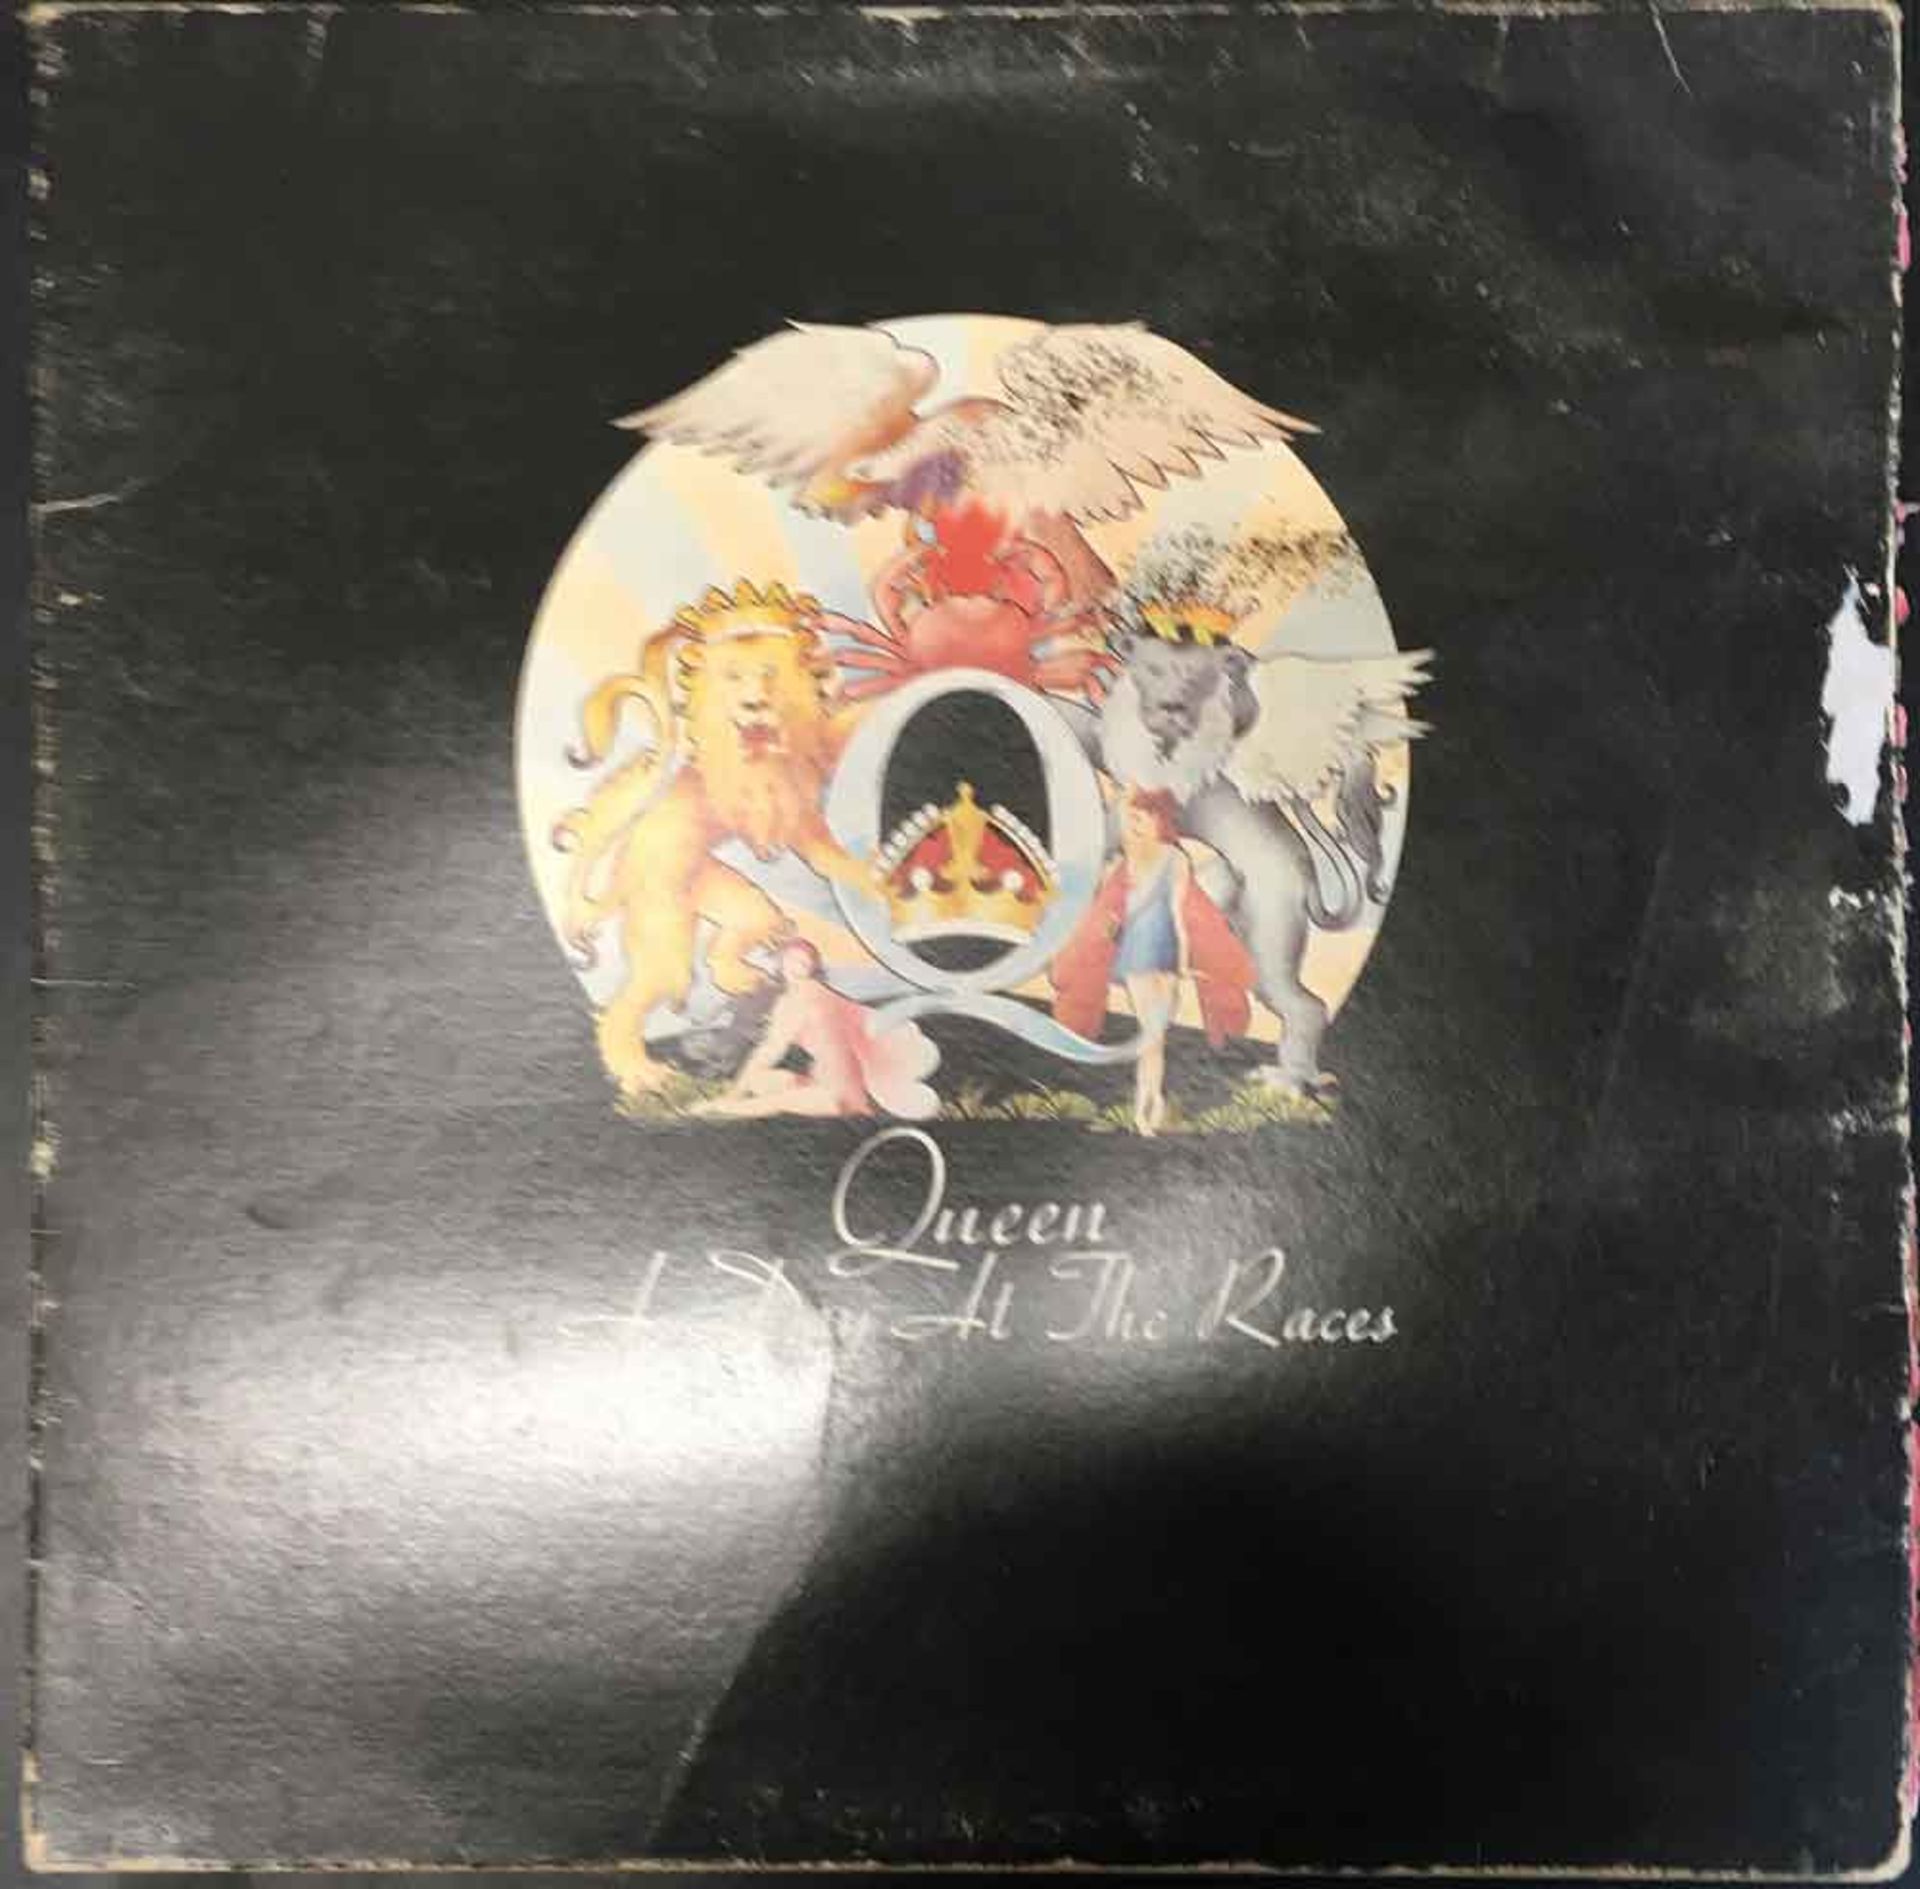 A Collection of Vinyl LP's, Queen, Bowie etc - Image 7 of 14